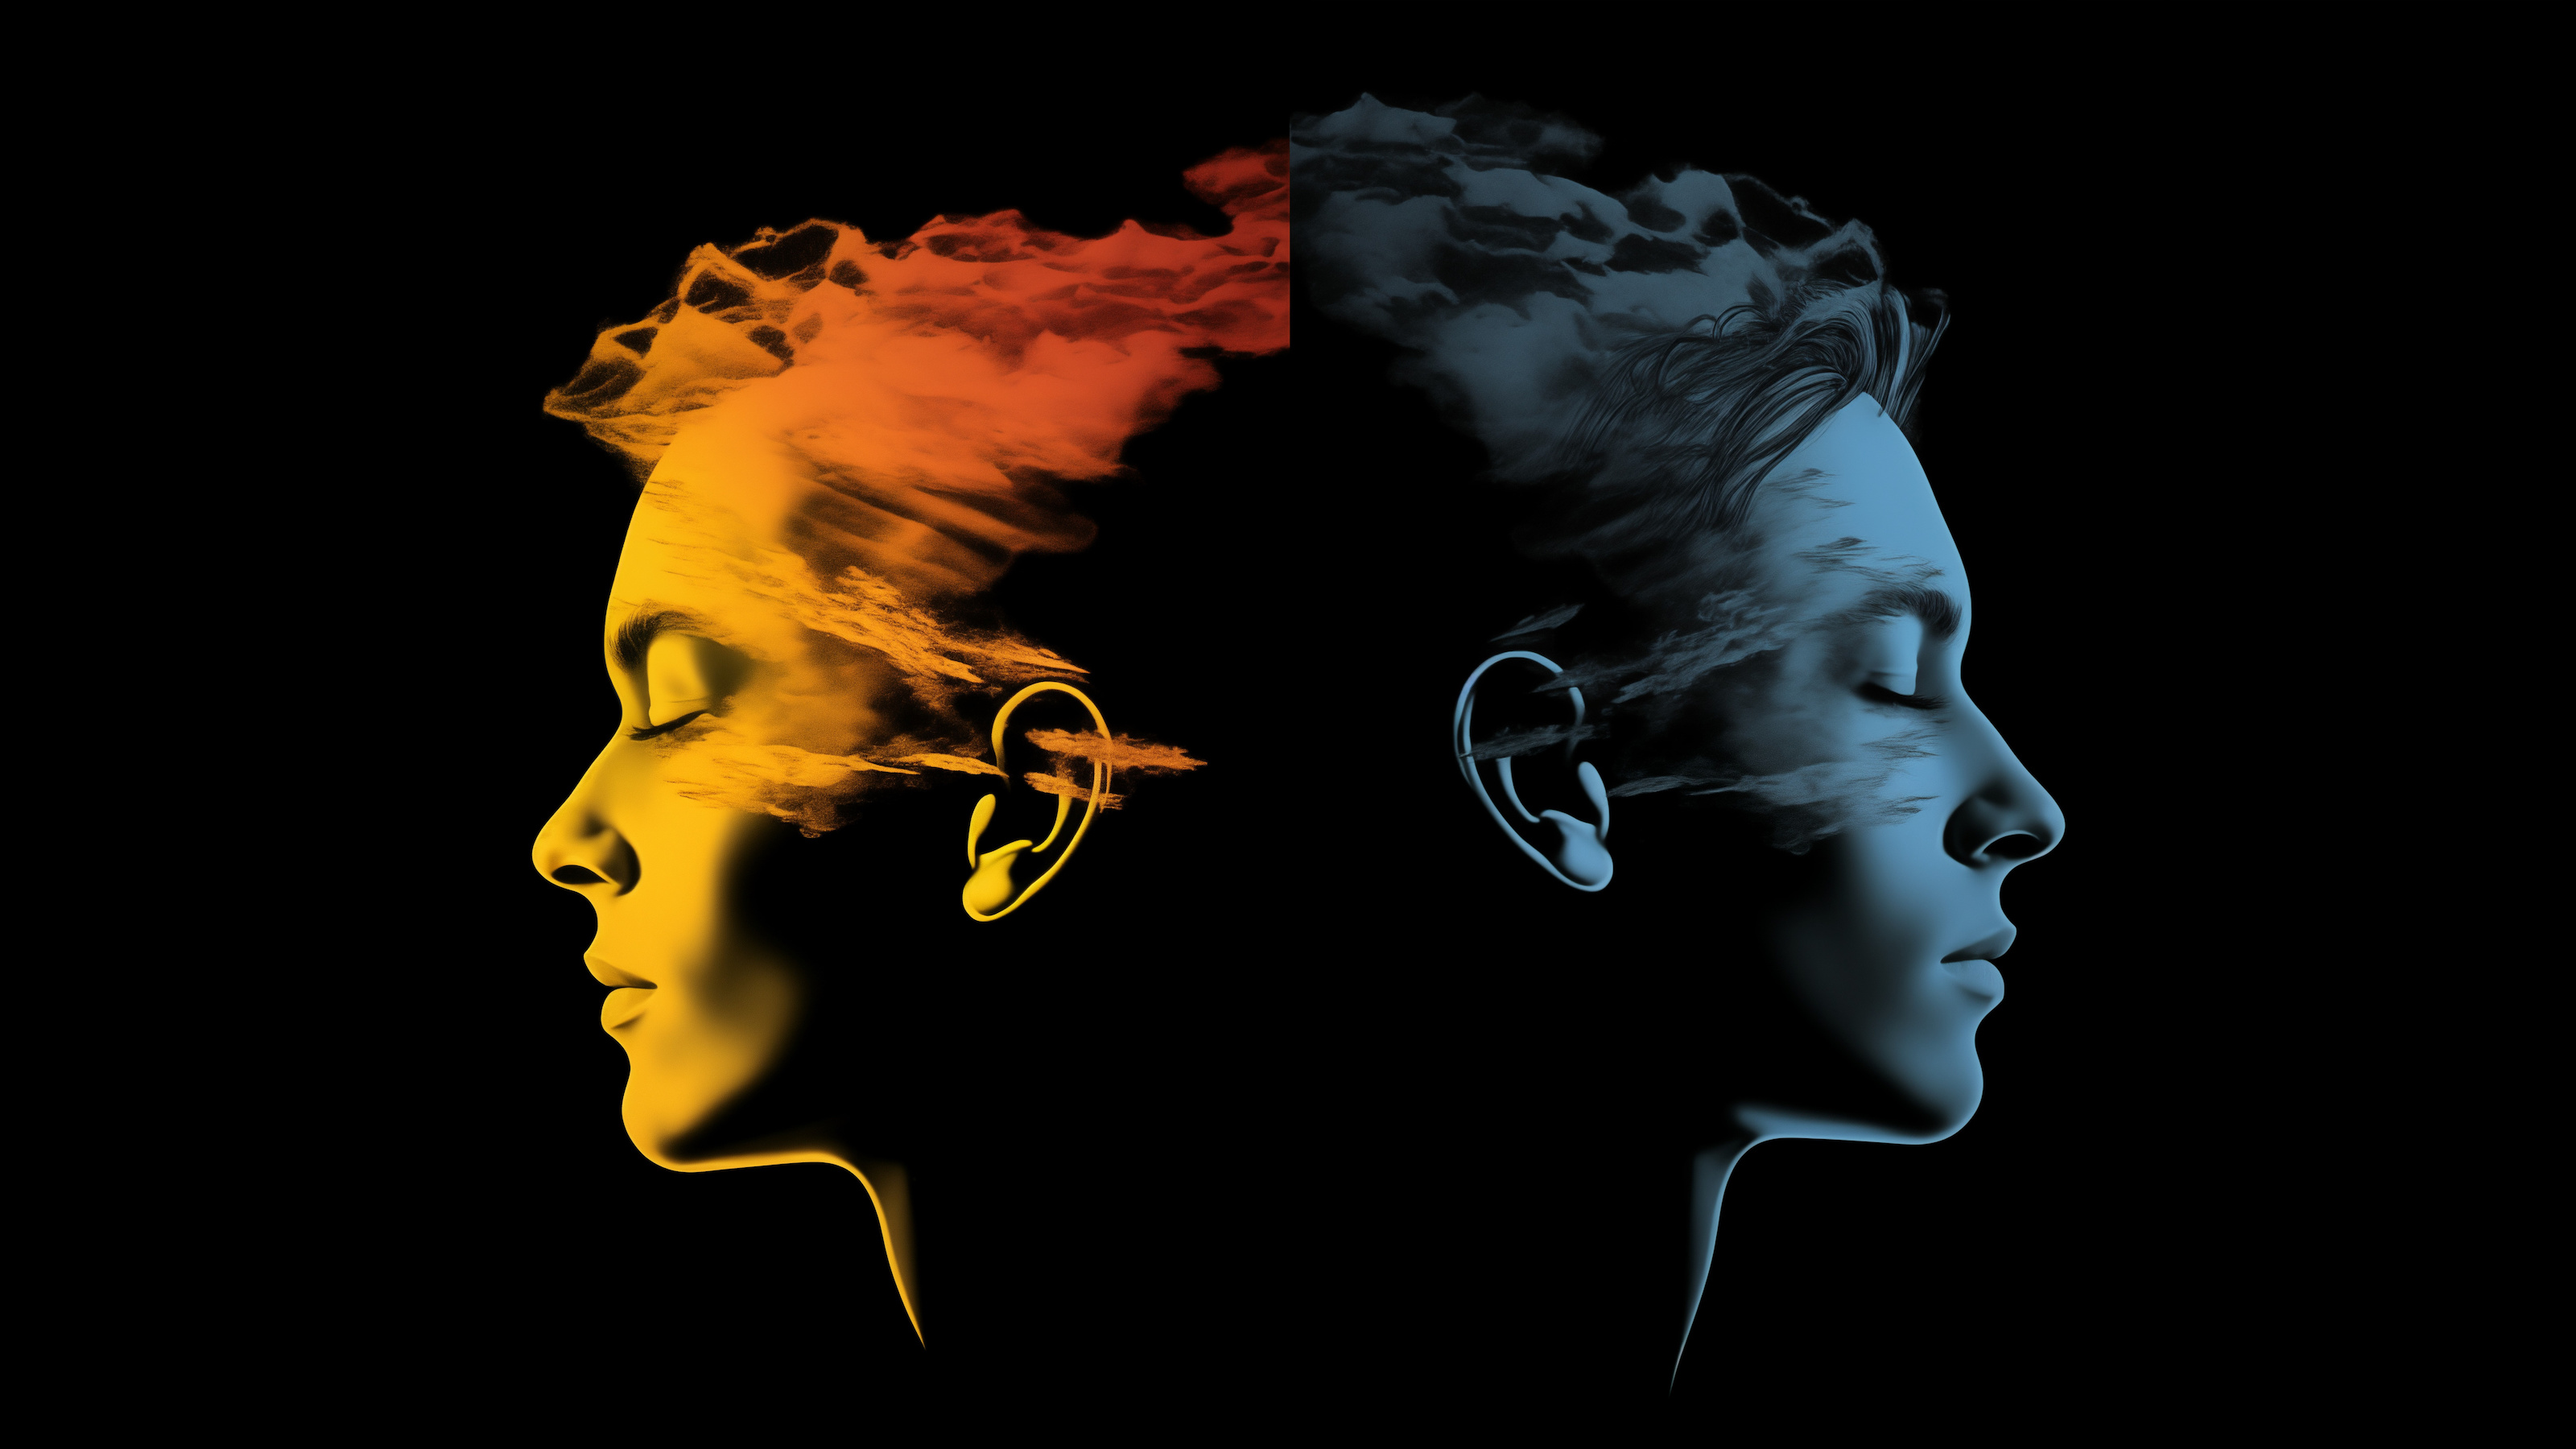 A profile of two mirrored faces with closed eyes, one in warm hues (yellow and orange) and the other in cool hues (blue and black), both blended with cloud imagery, evokes a serene balance that can help handle technostress.